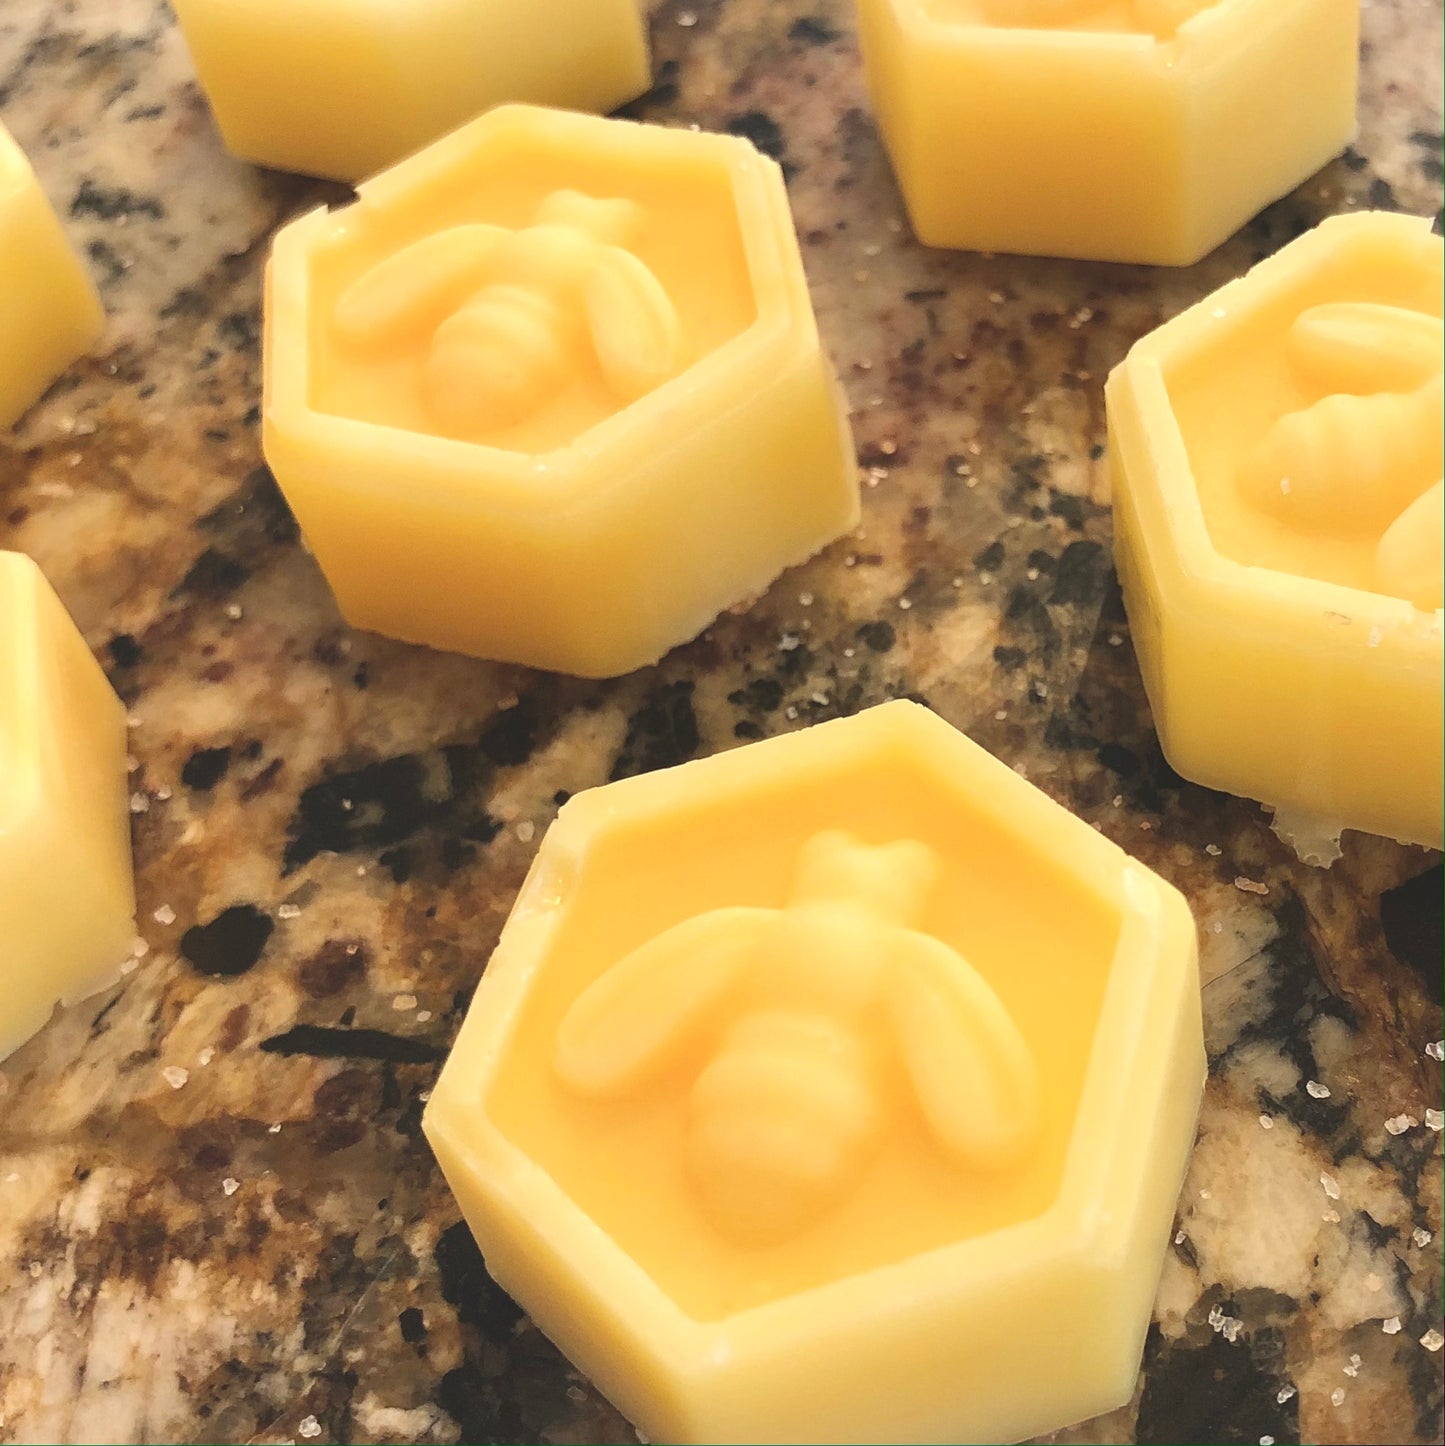 Handmade personal soap - Day at the Spa